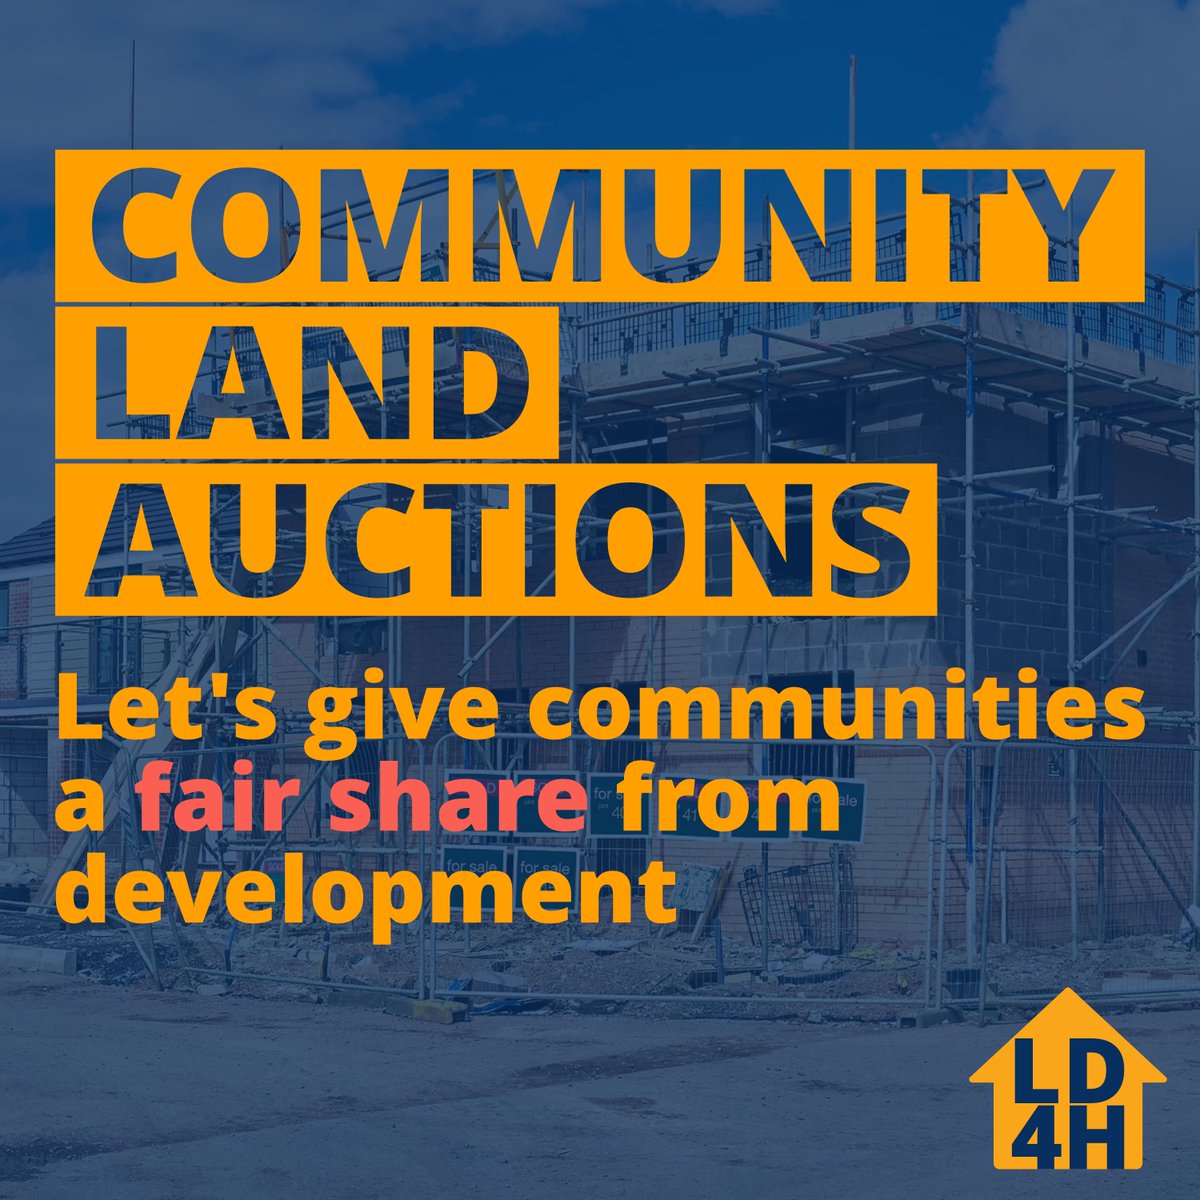 Community Land auctions give communities a fair share of the uplift from planning permission. @EdwardJDavey helped introduce the idea to promote a liberal and localist approach to solving the housing crisis! libhousing.com/community-land…